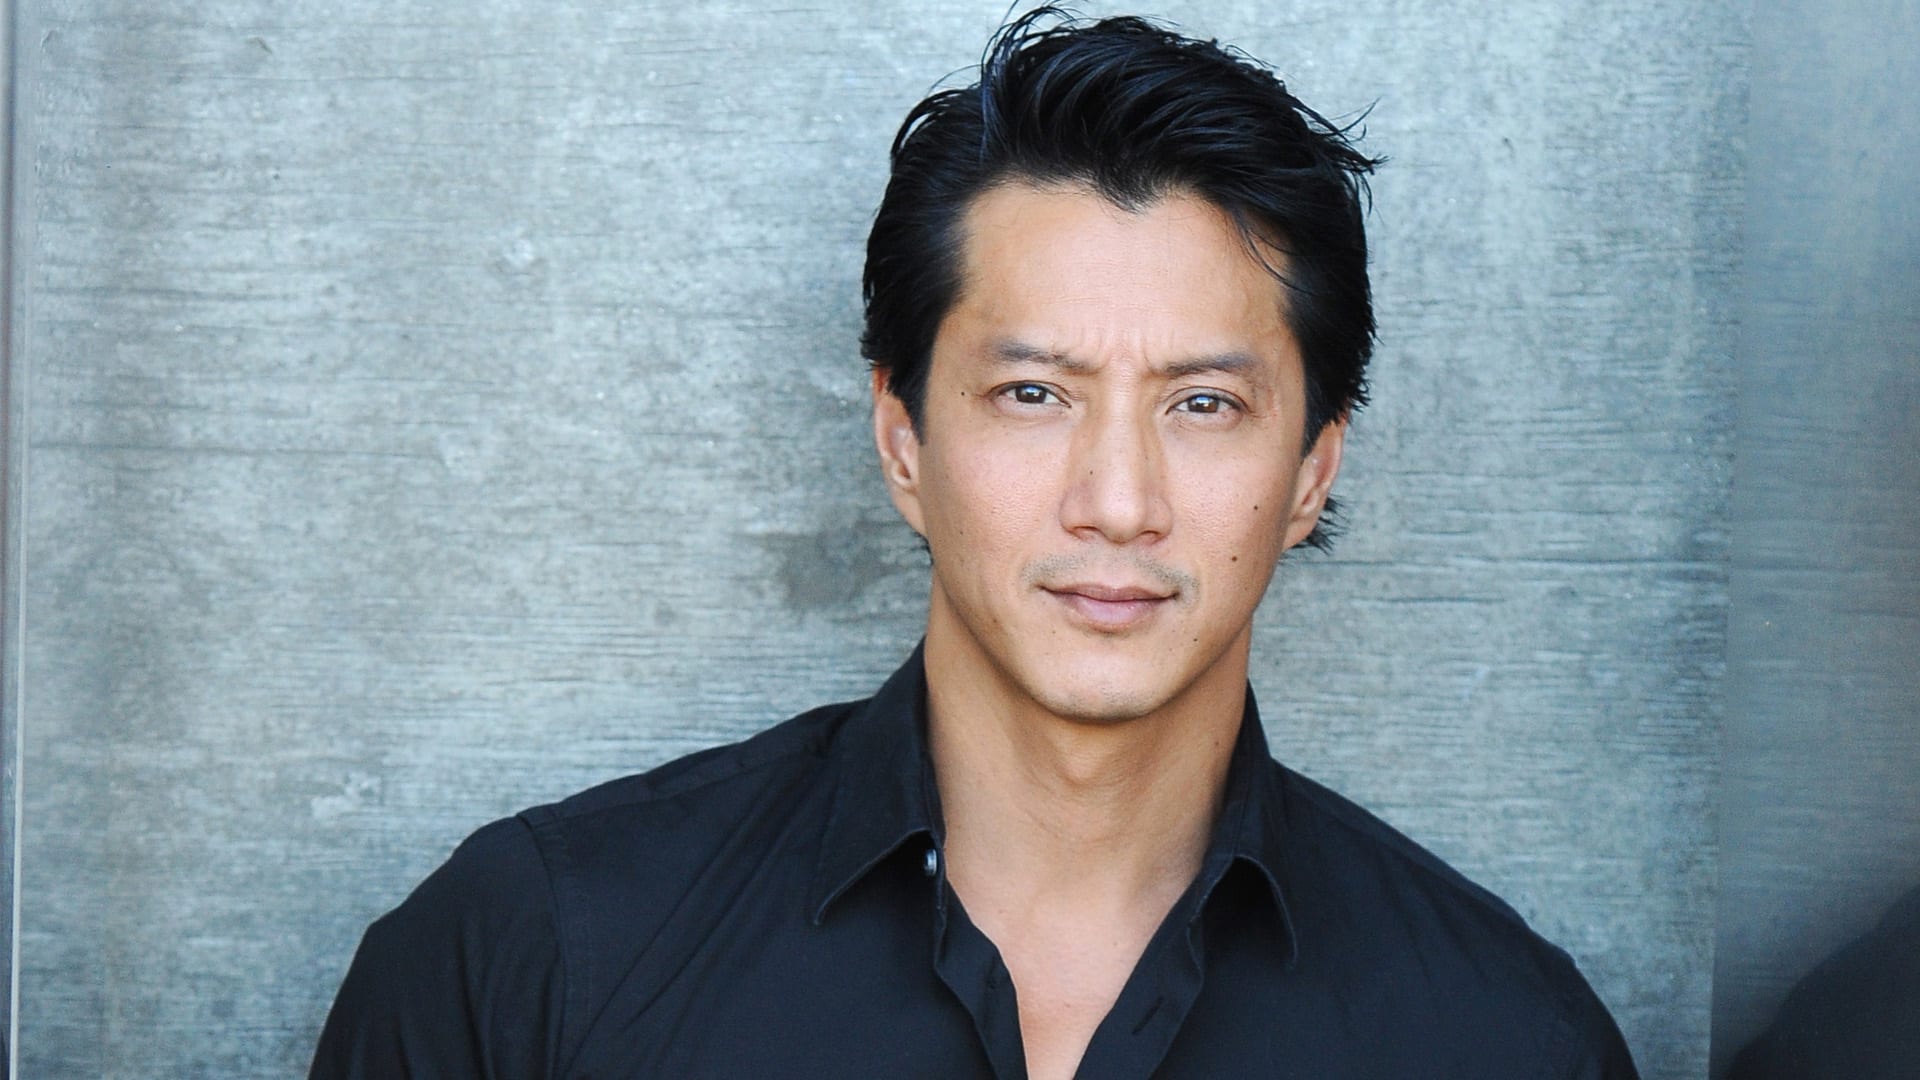 The Good Doctor’s Will Yun Lee On His Memorable Roles, From Die Another Day To Altered Carbon